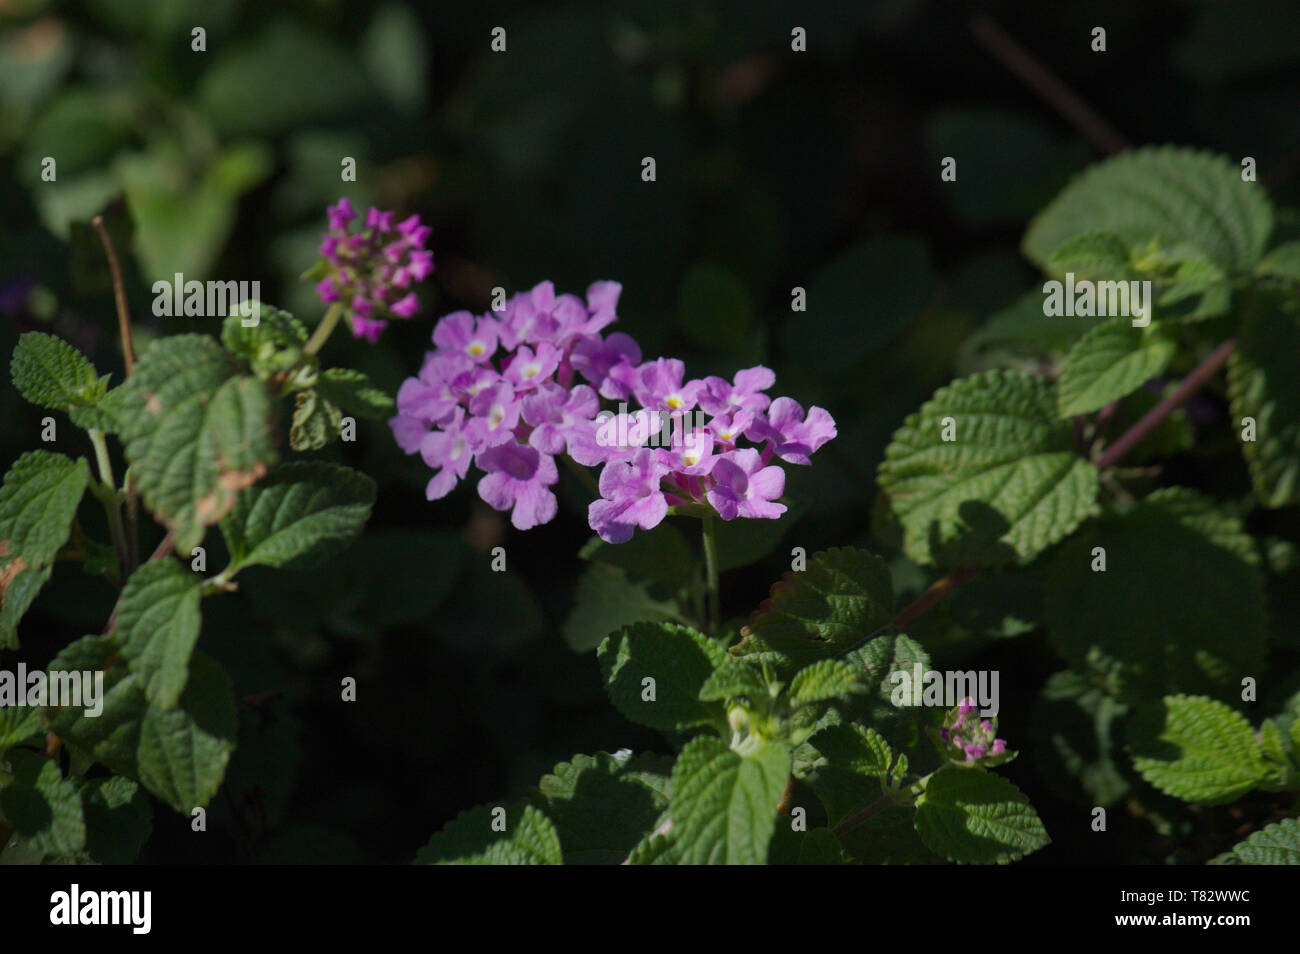 Purple flower of the lantana camera plant that stands out because it is illuminated by the sun on a dark background Stock Photo